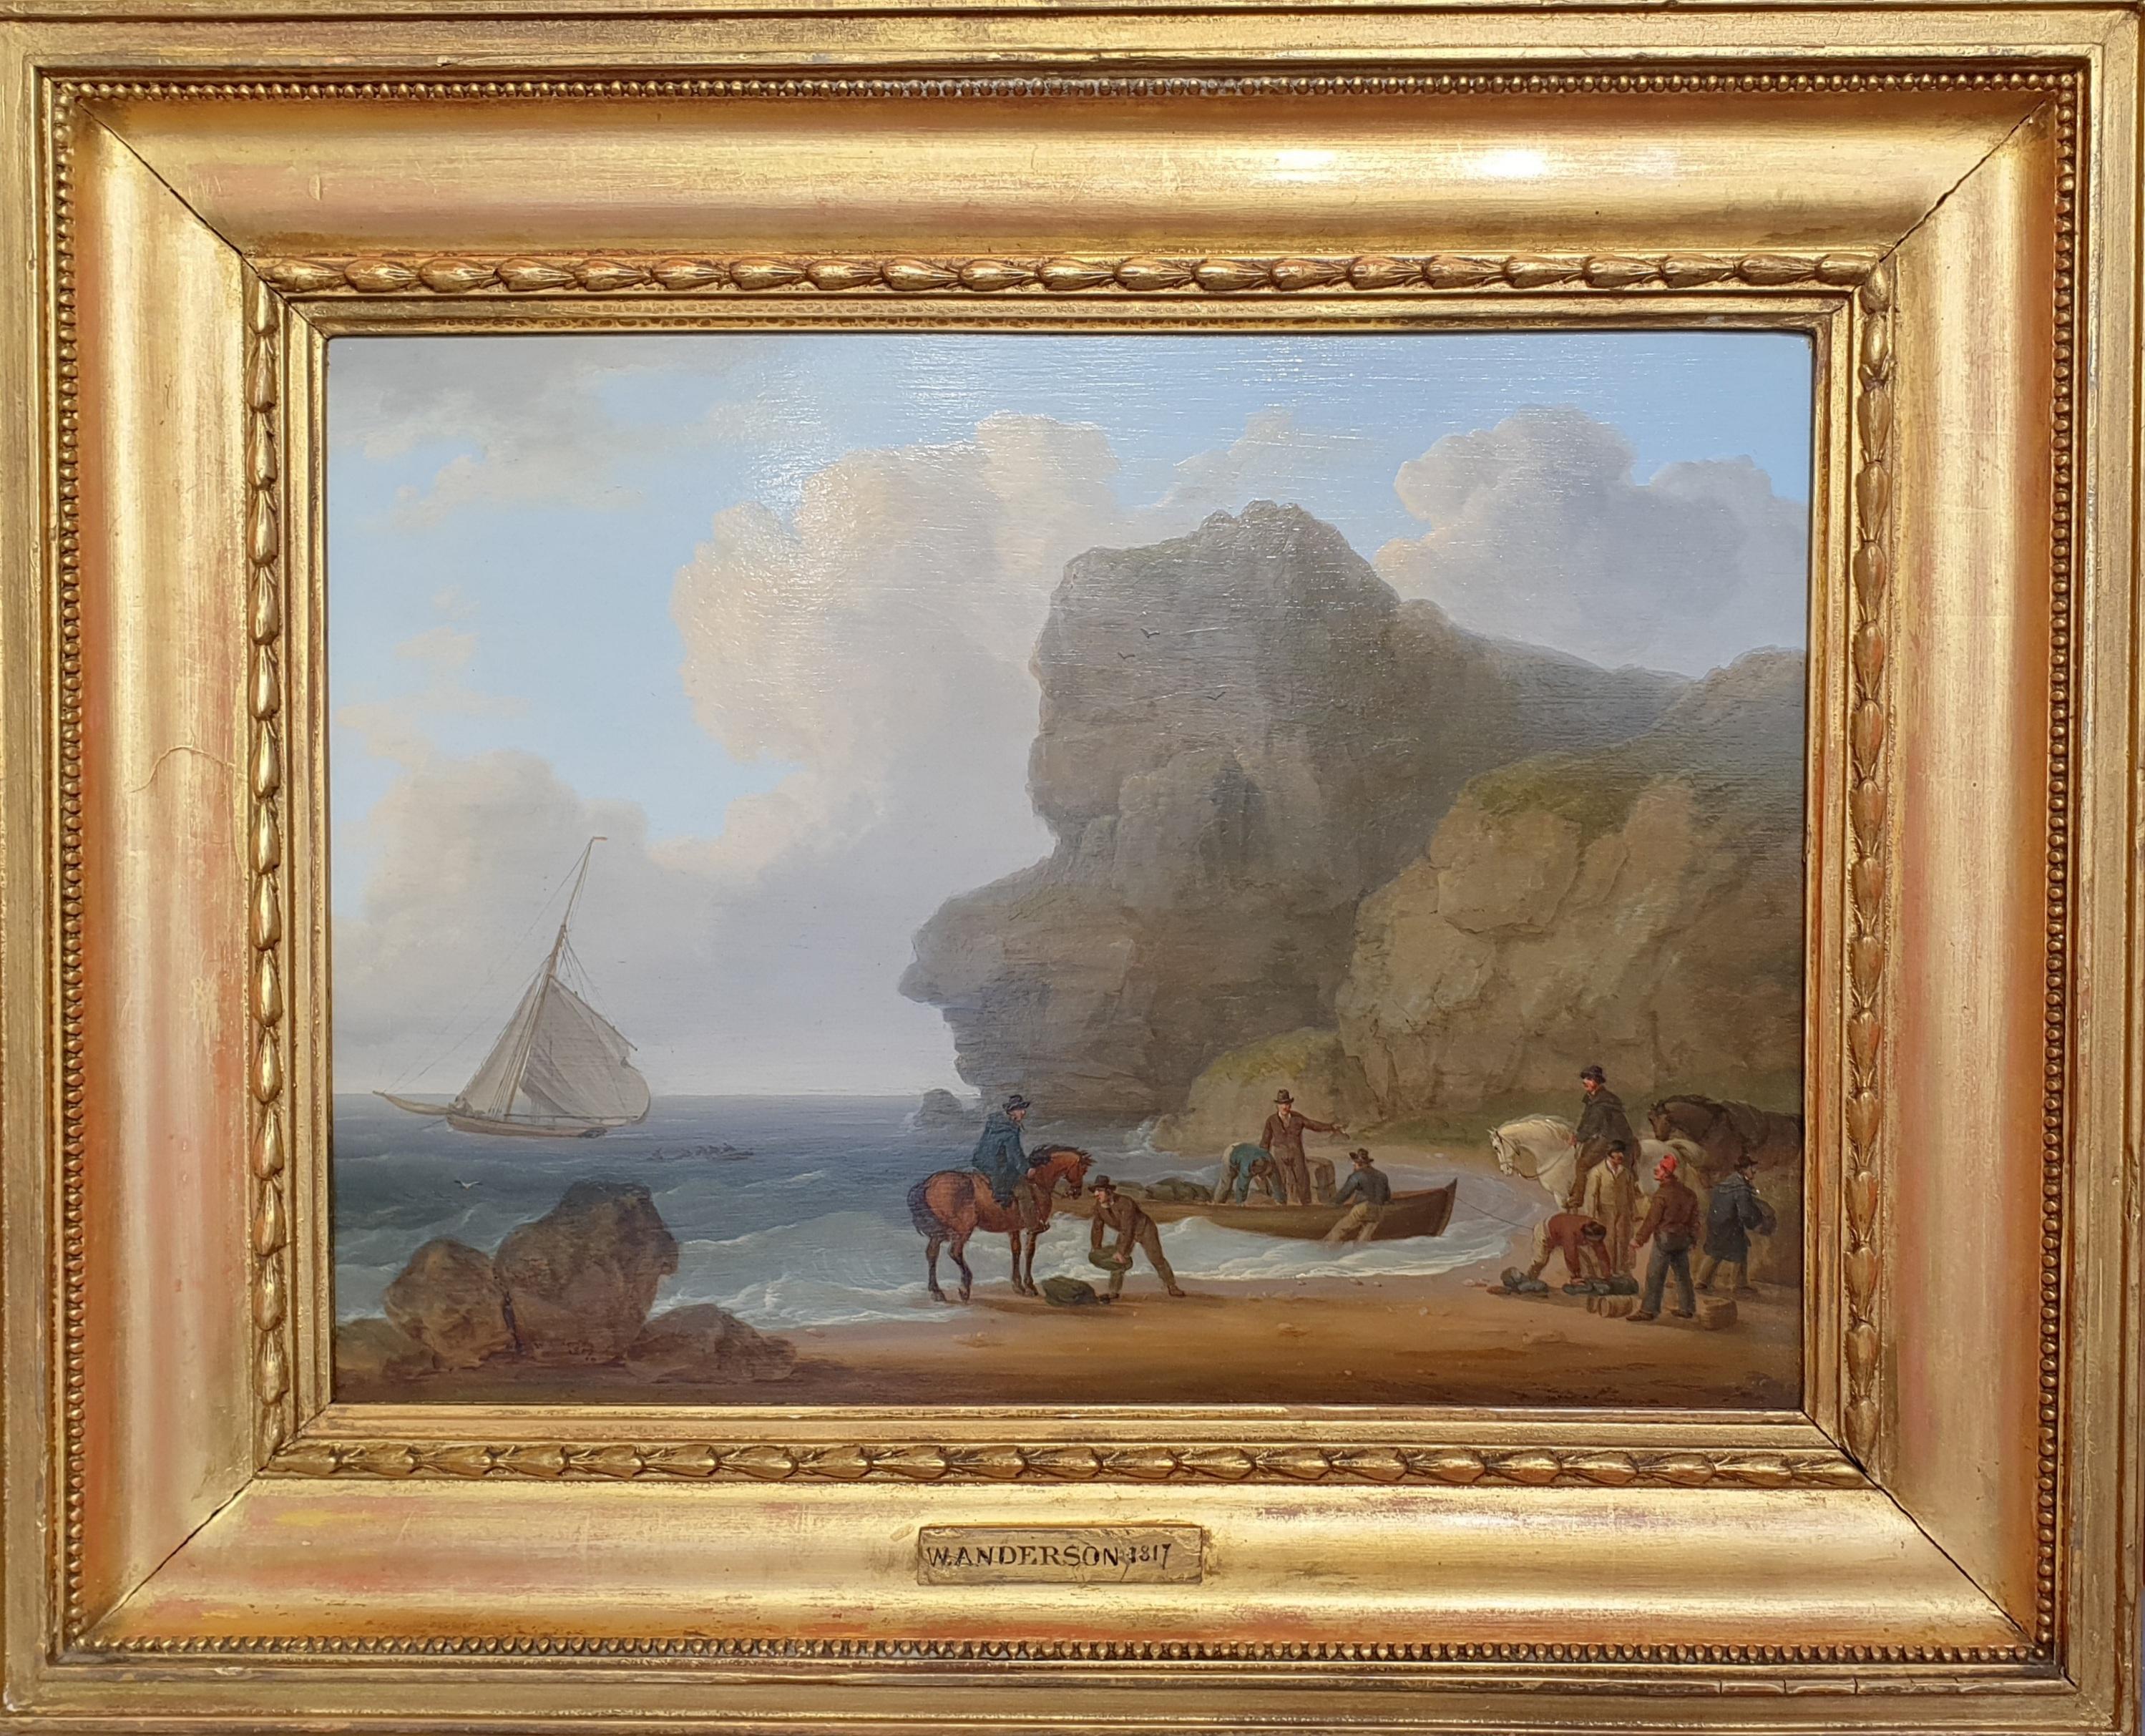 William Anderson Landscape Painting - Marine painting sea shore smugglers boat scotttish 19th